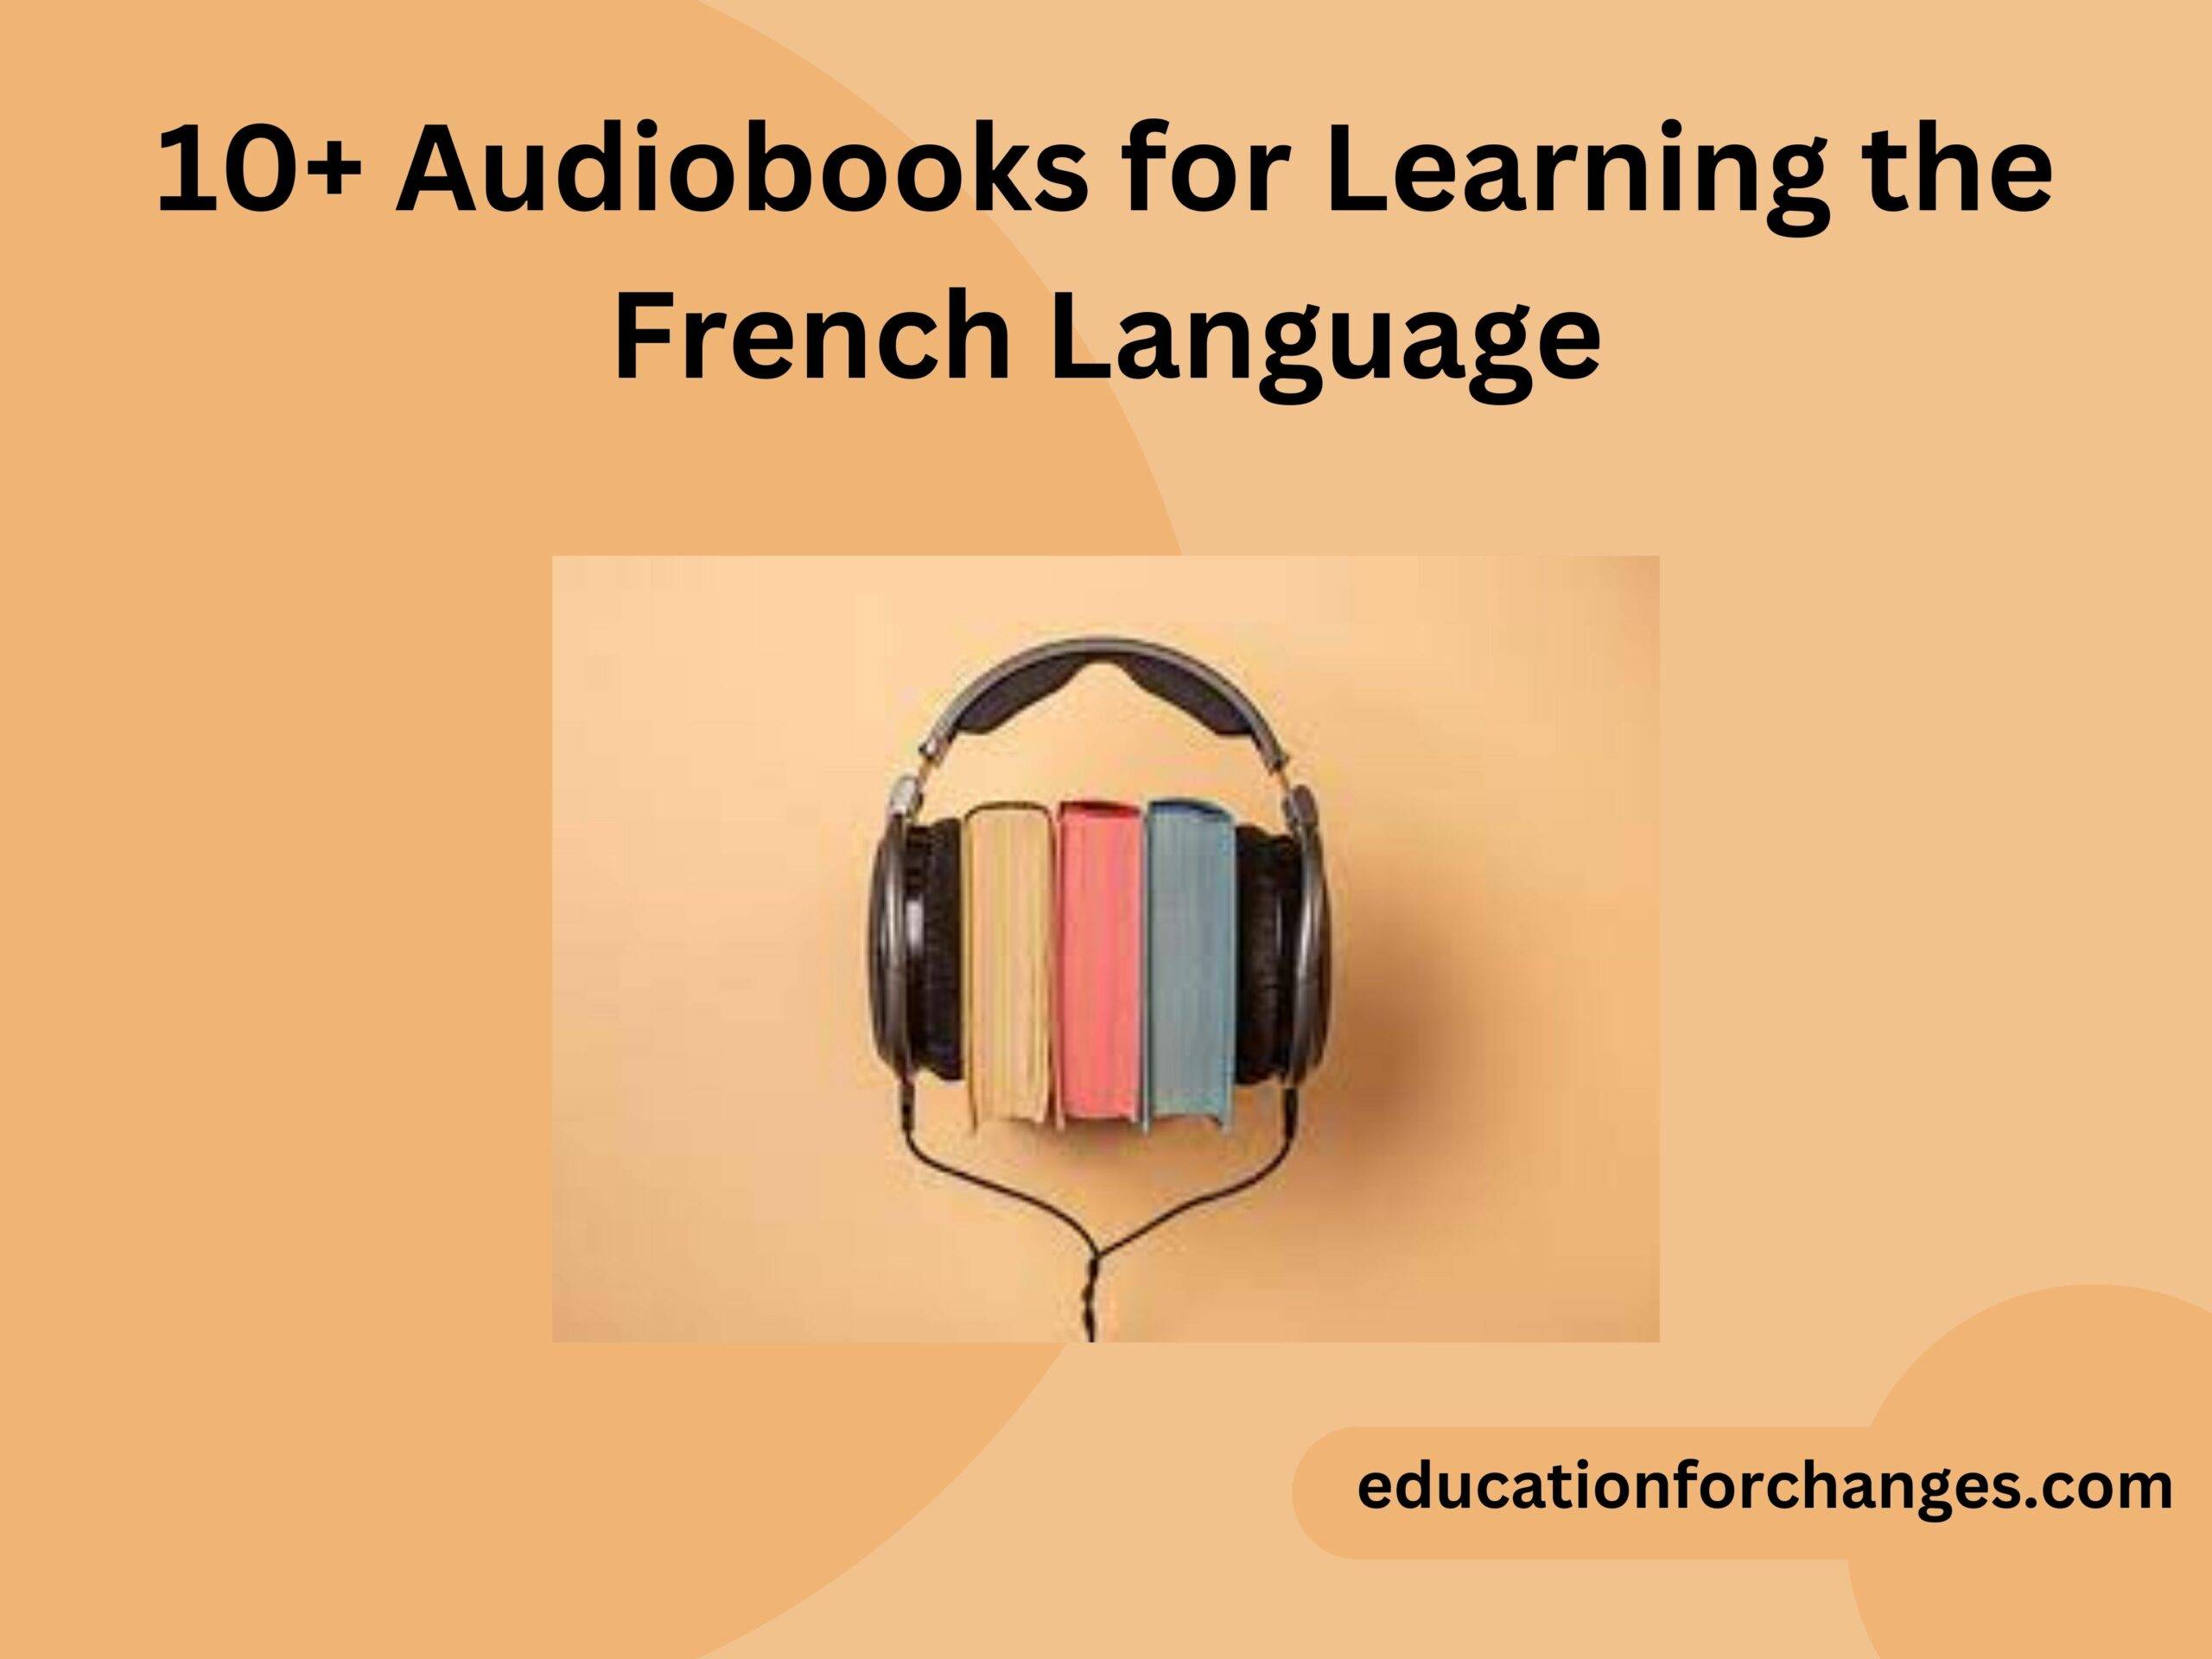 10+ Audiobooks for Learning the French Language